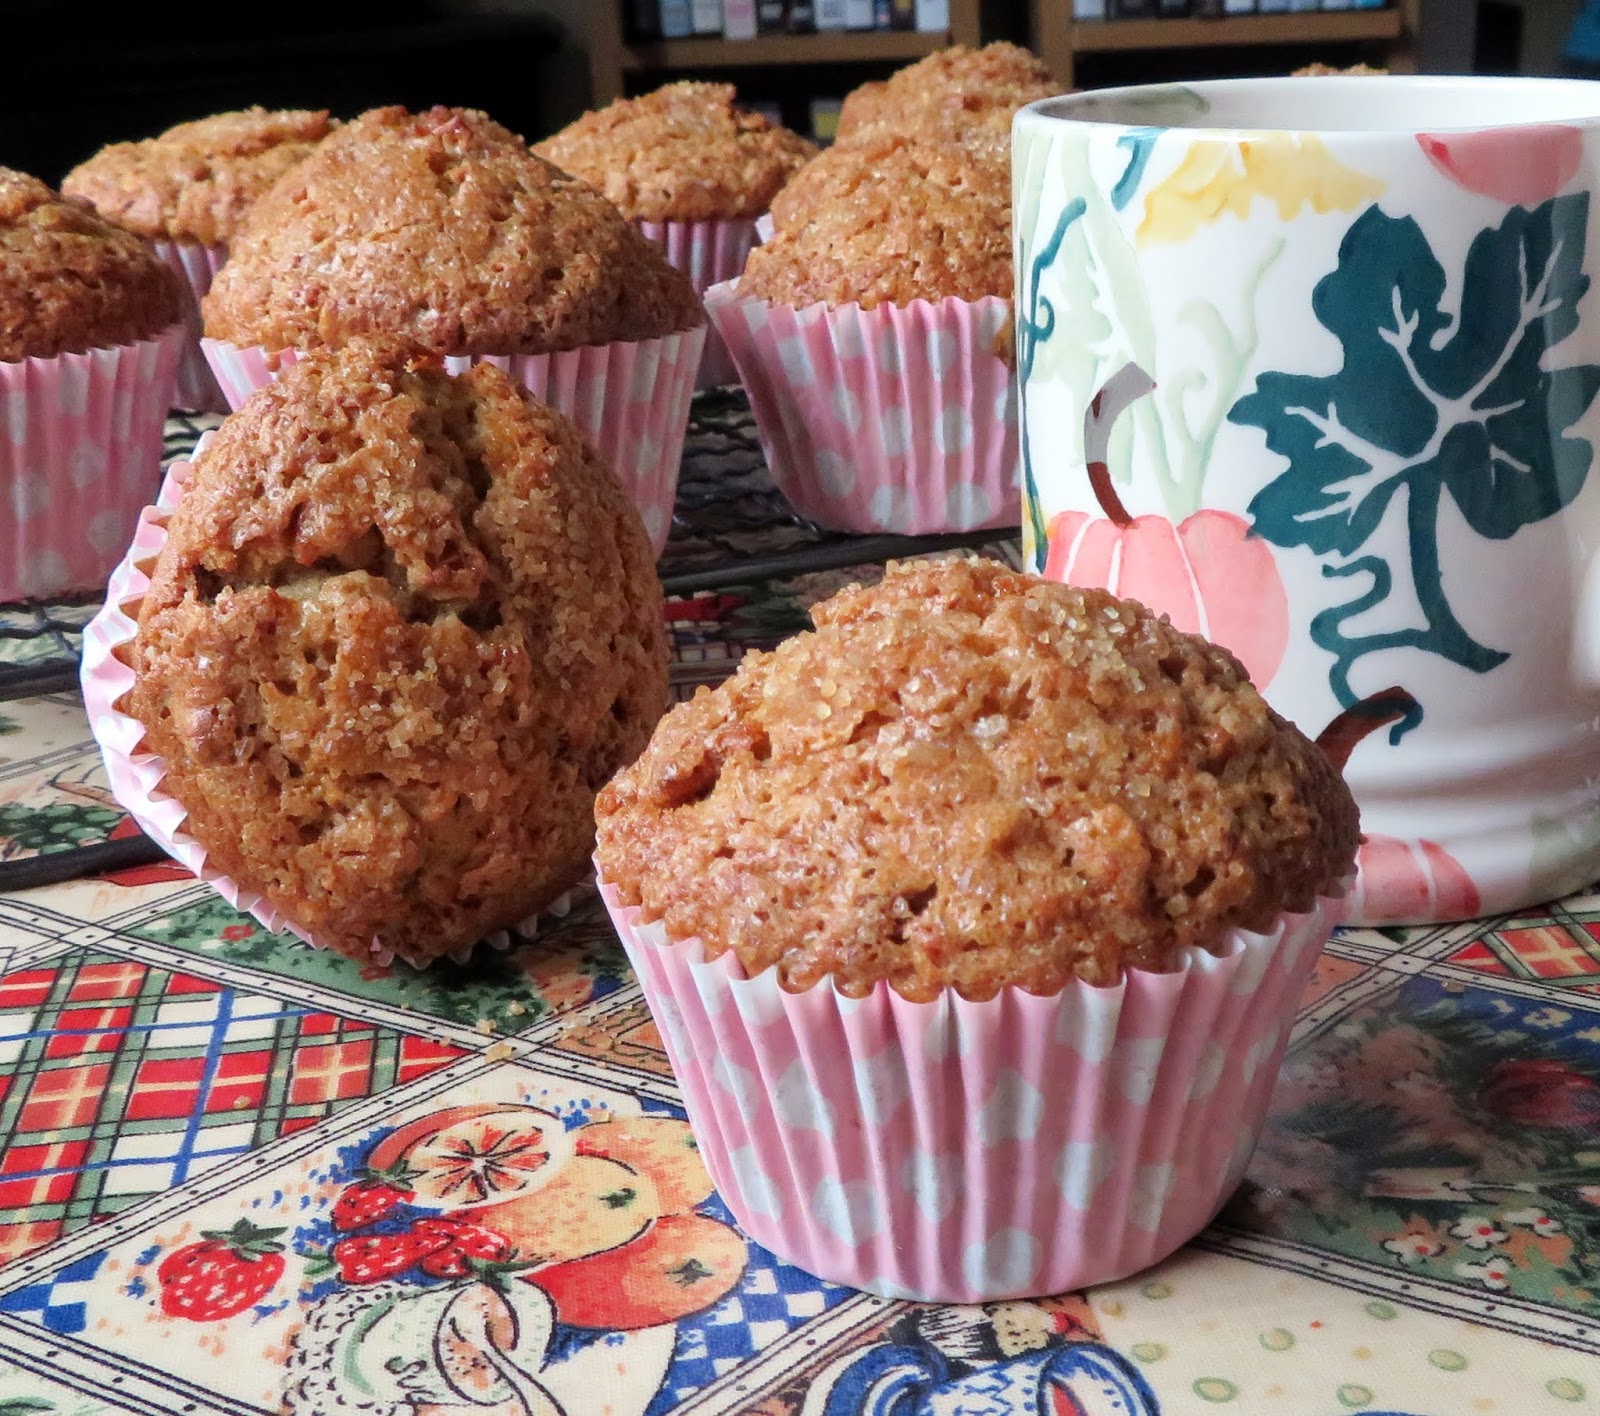 The English Kitchen: Crunchy Topped Maple Walnut Oatmeal Muffins